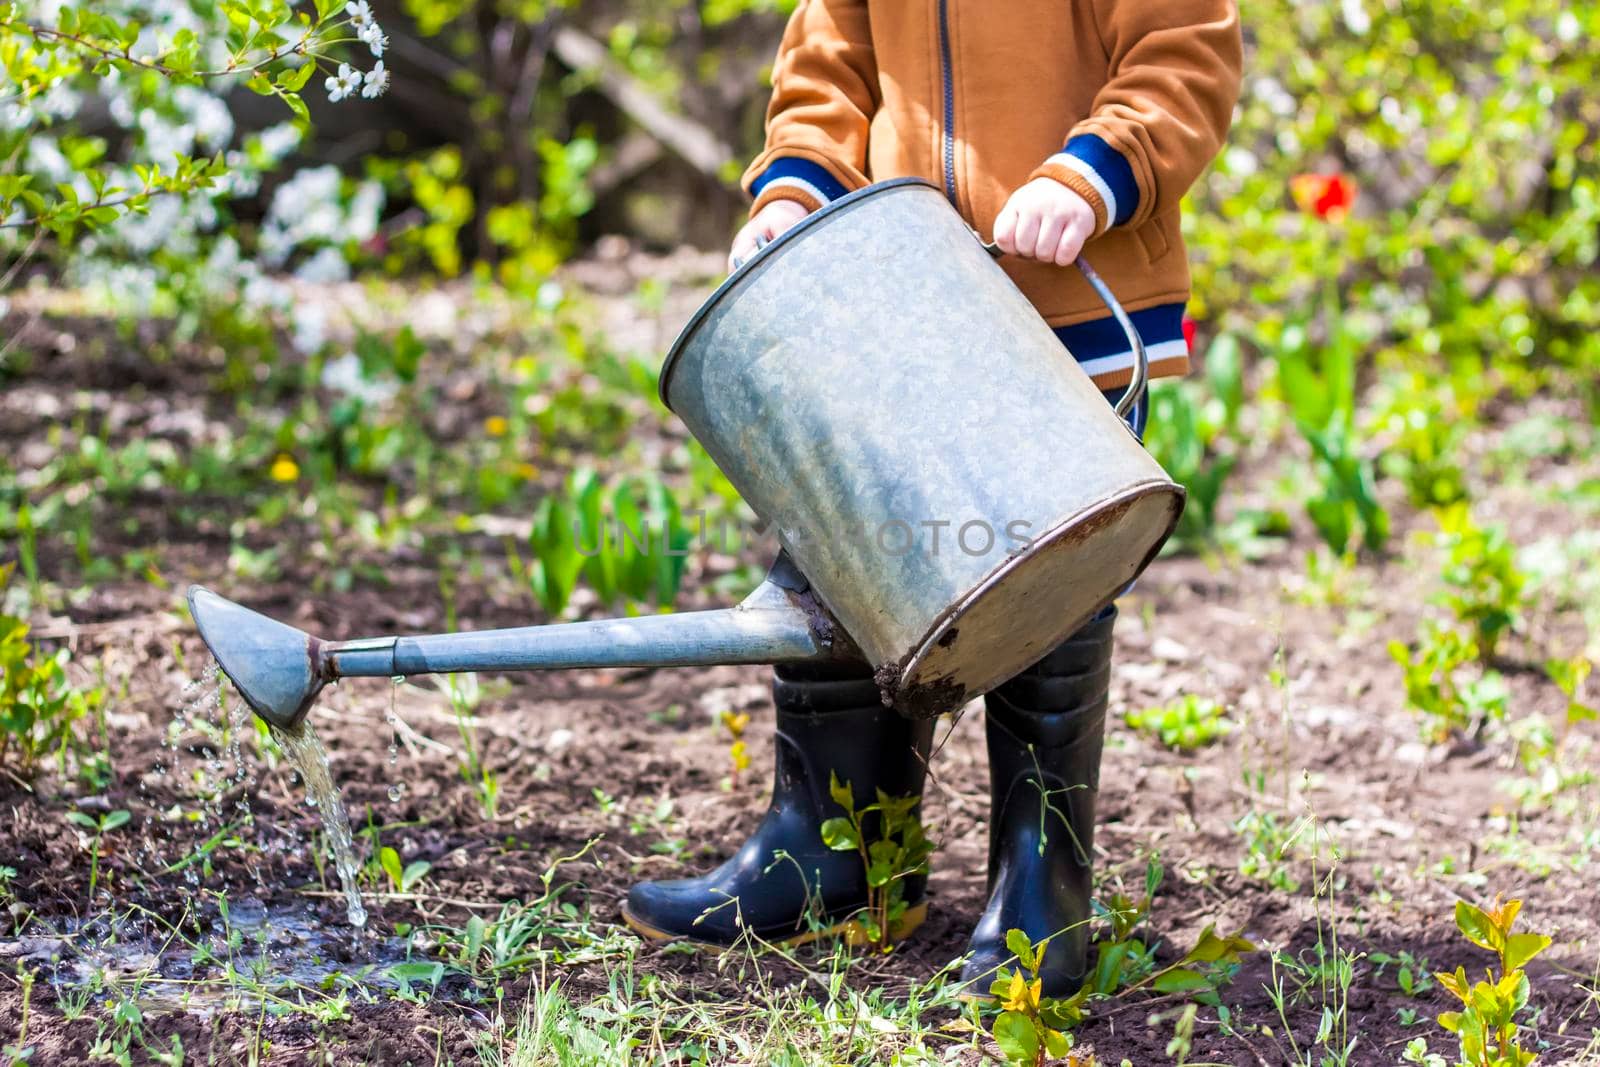 Cute little toddler boy in a hat and rubber boots is watering plants with a watering can in the garden. A charming little kid helping his parents grow vegetables. Active holidays with children